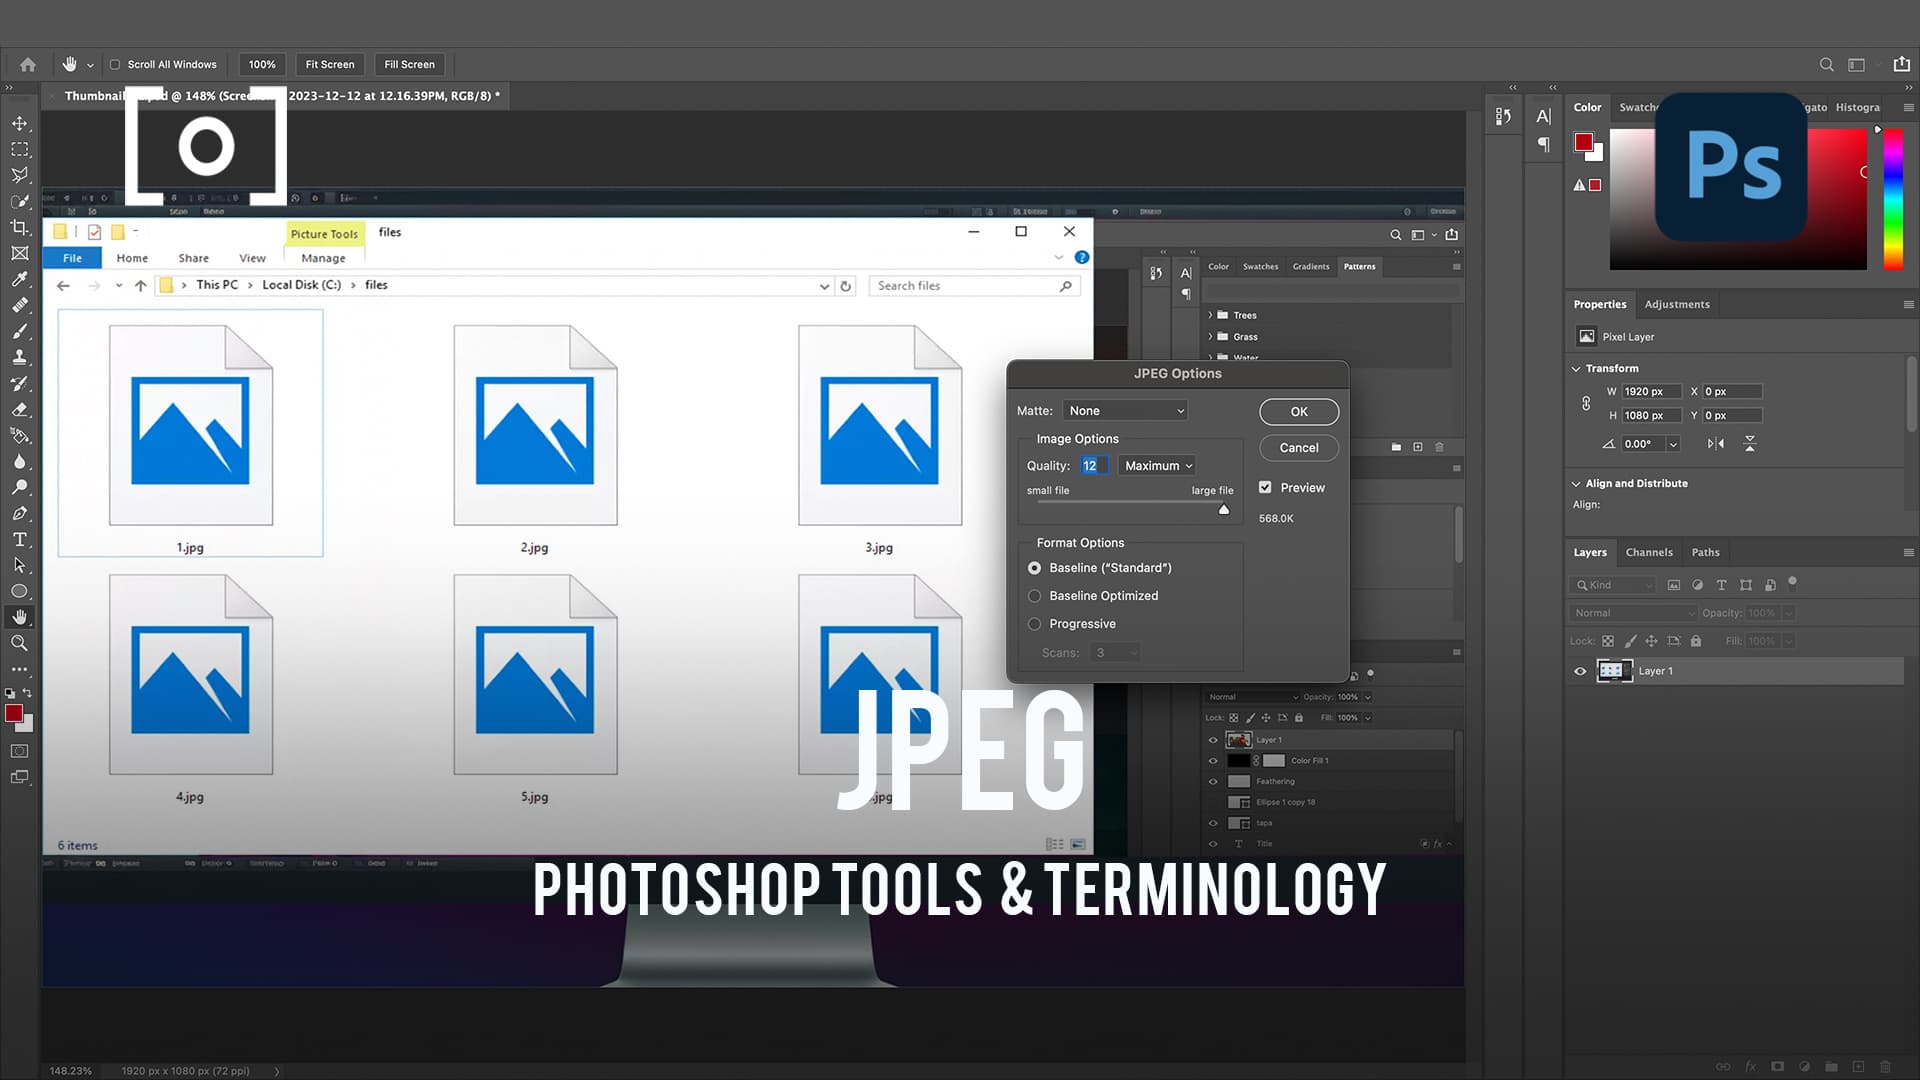 How to Use the Hand Tool in Photoshop - PHLEARN